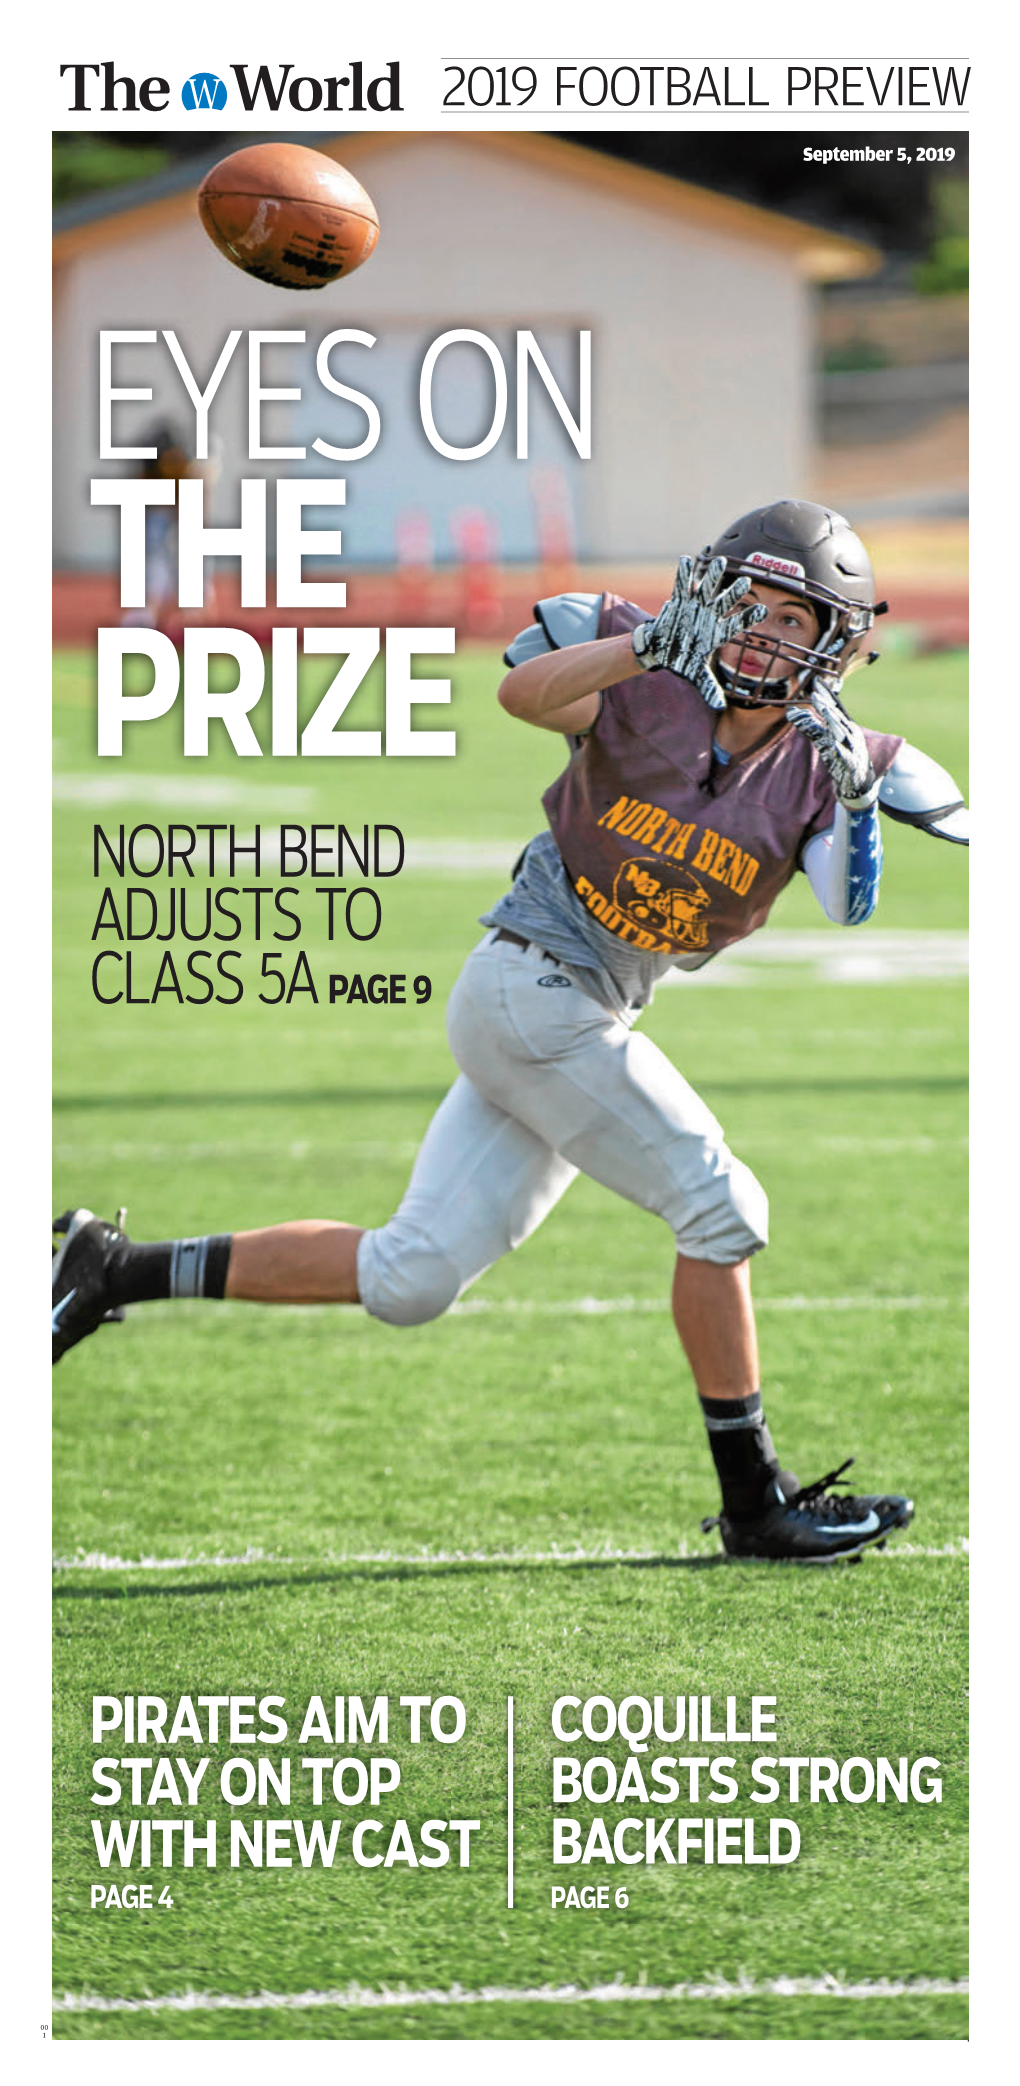 North Bend Adjusts to Class 5A Page 9